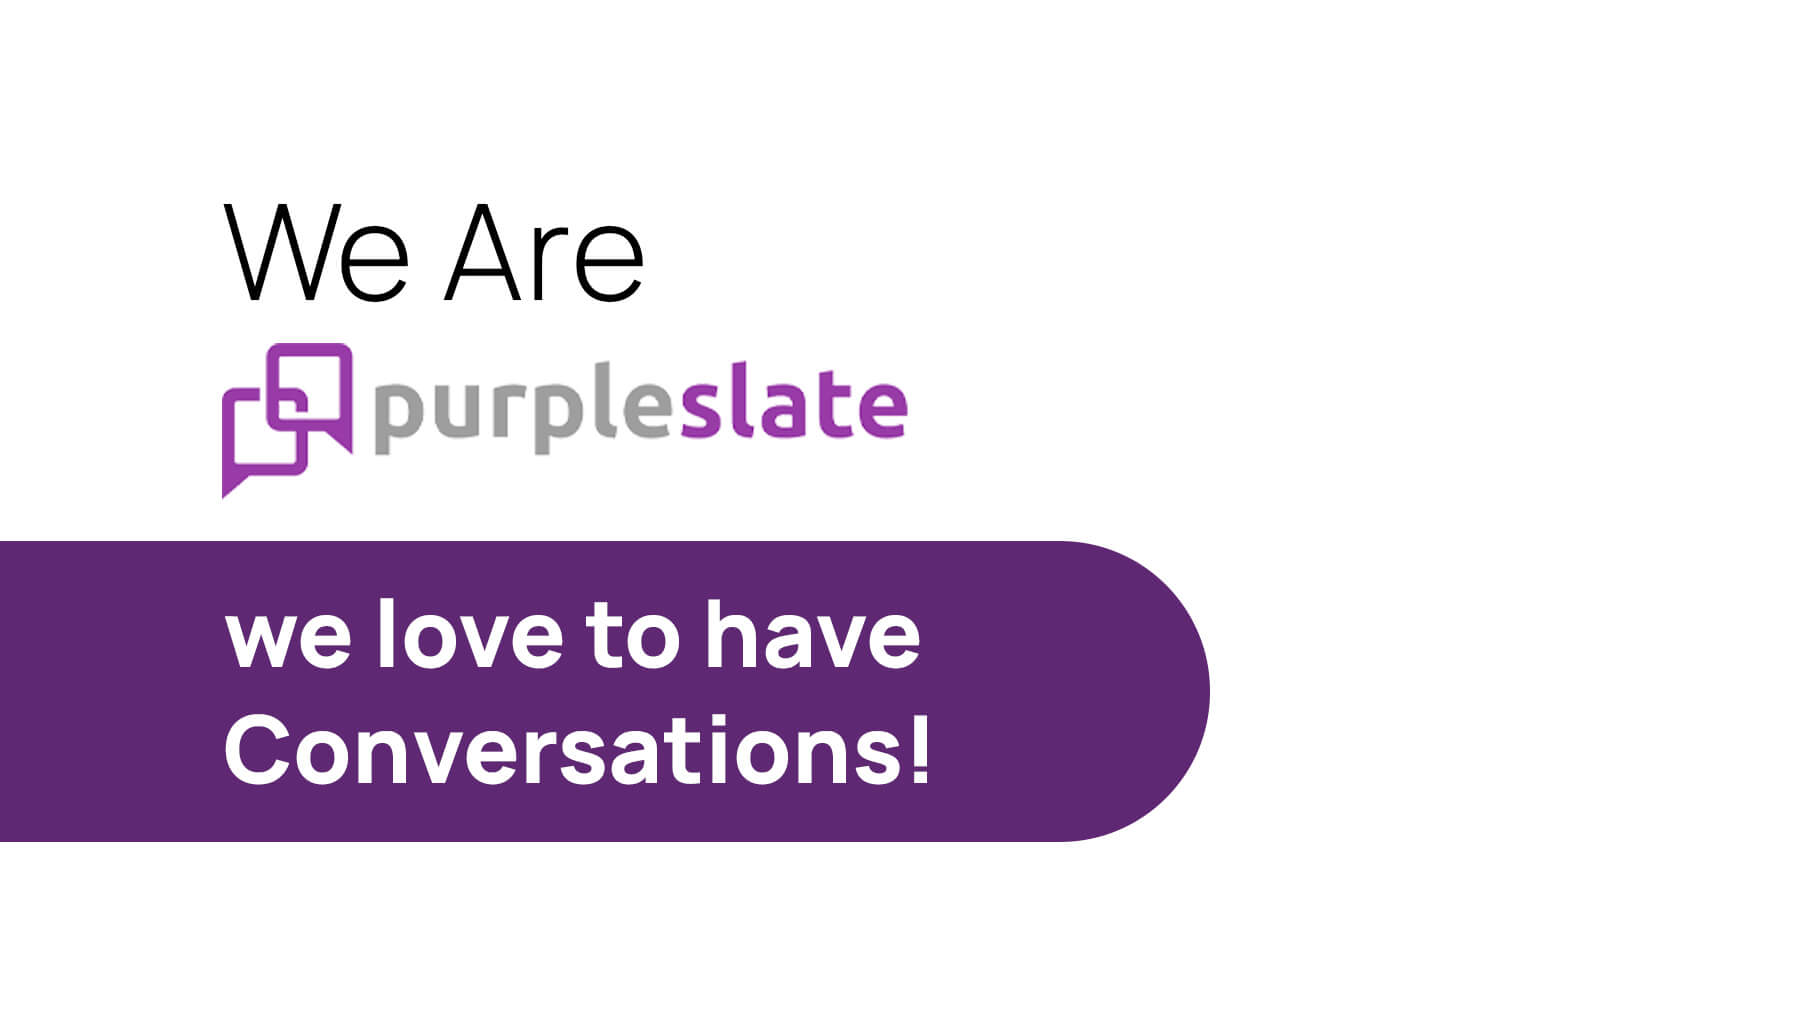 Image containing we Love to have conversations!